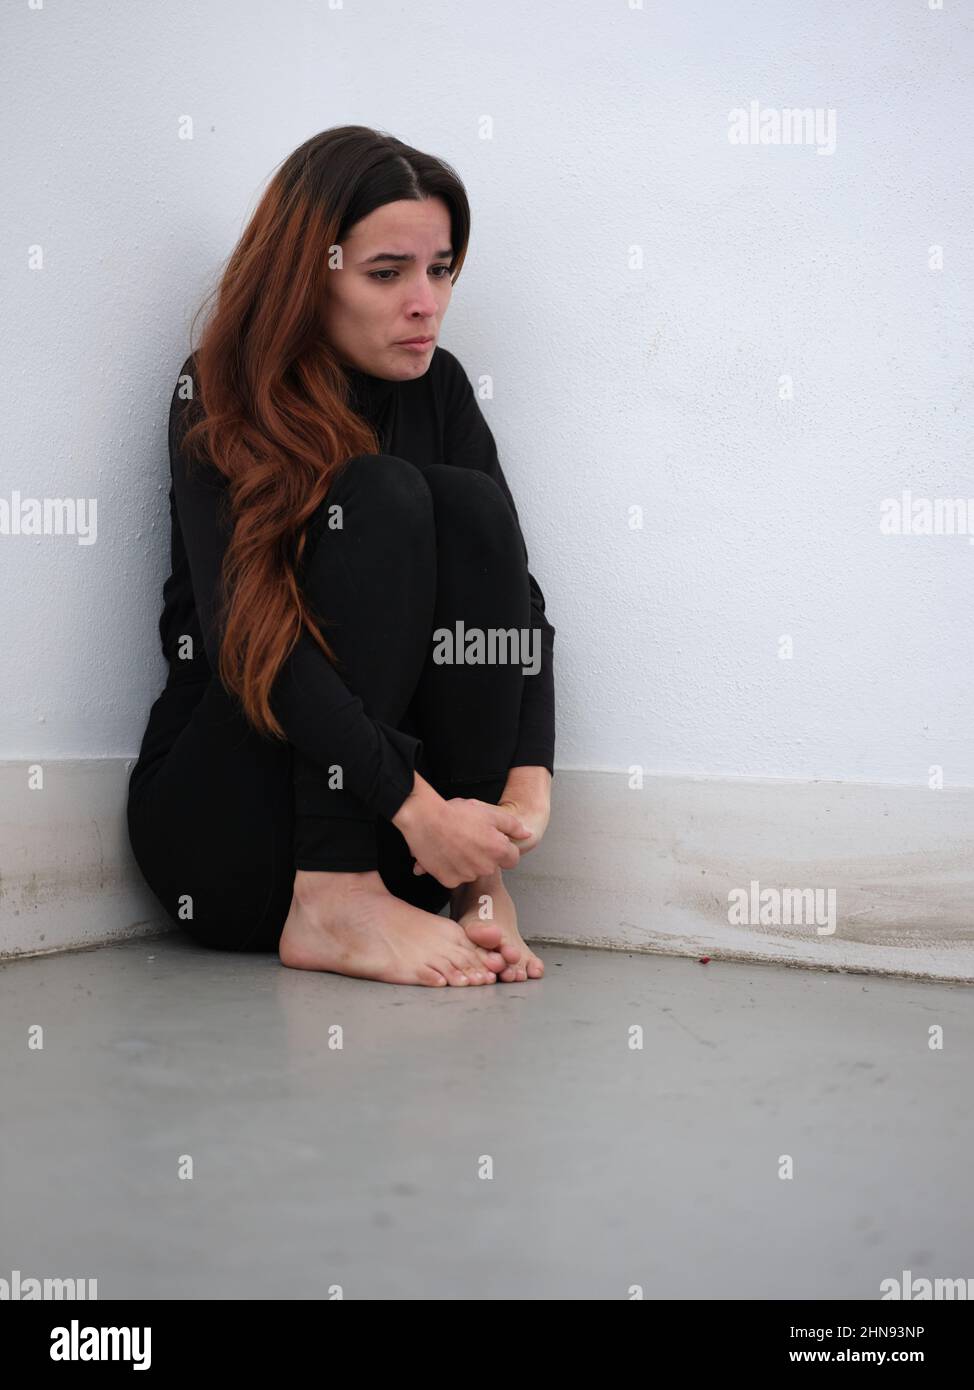 Low angle view of a sad young woman in the corner of a room dressed in black barefoot and on the verge of tears. Stock Photo